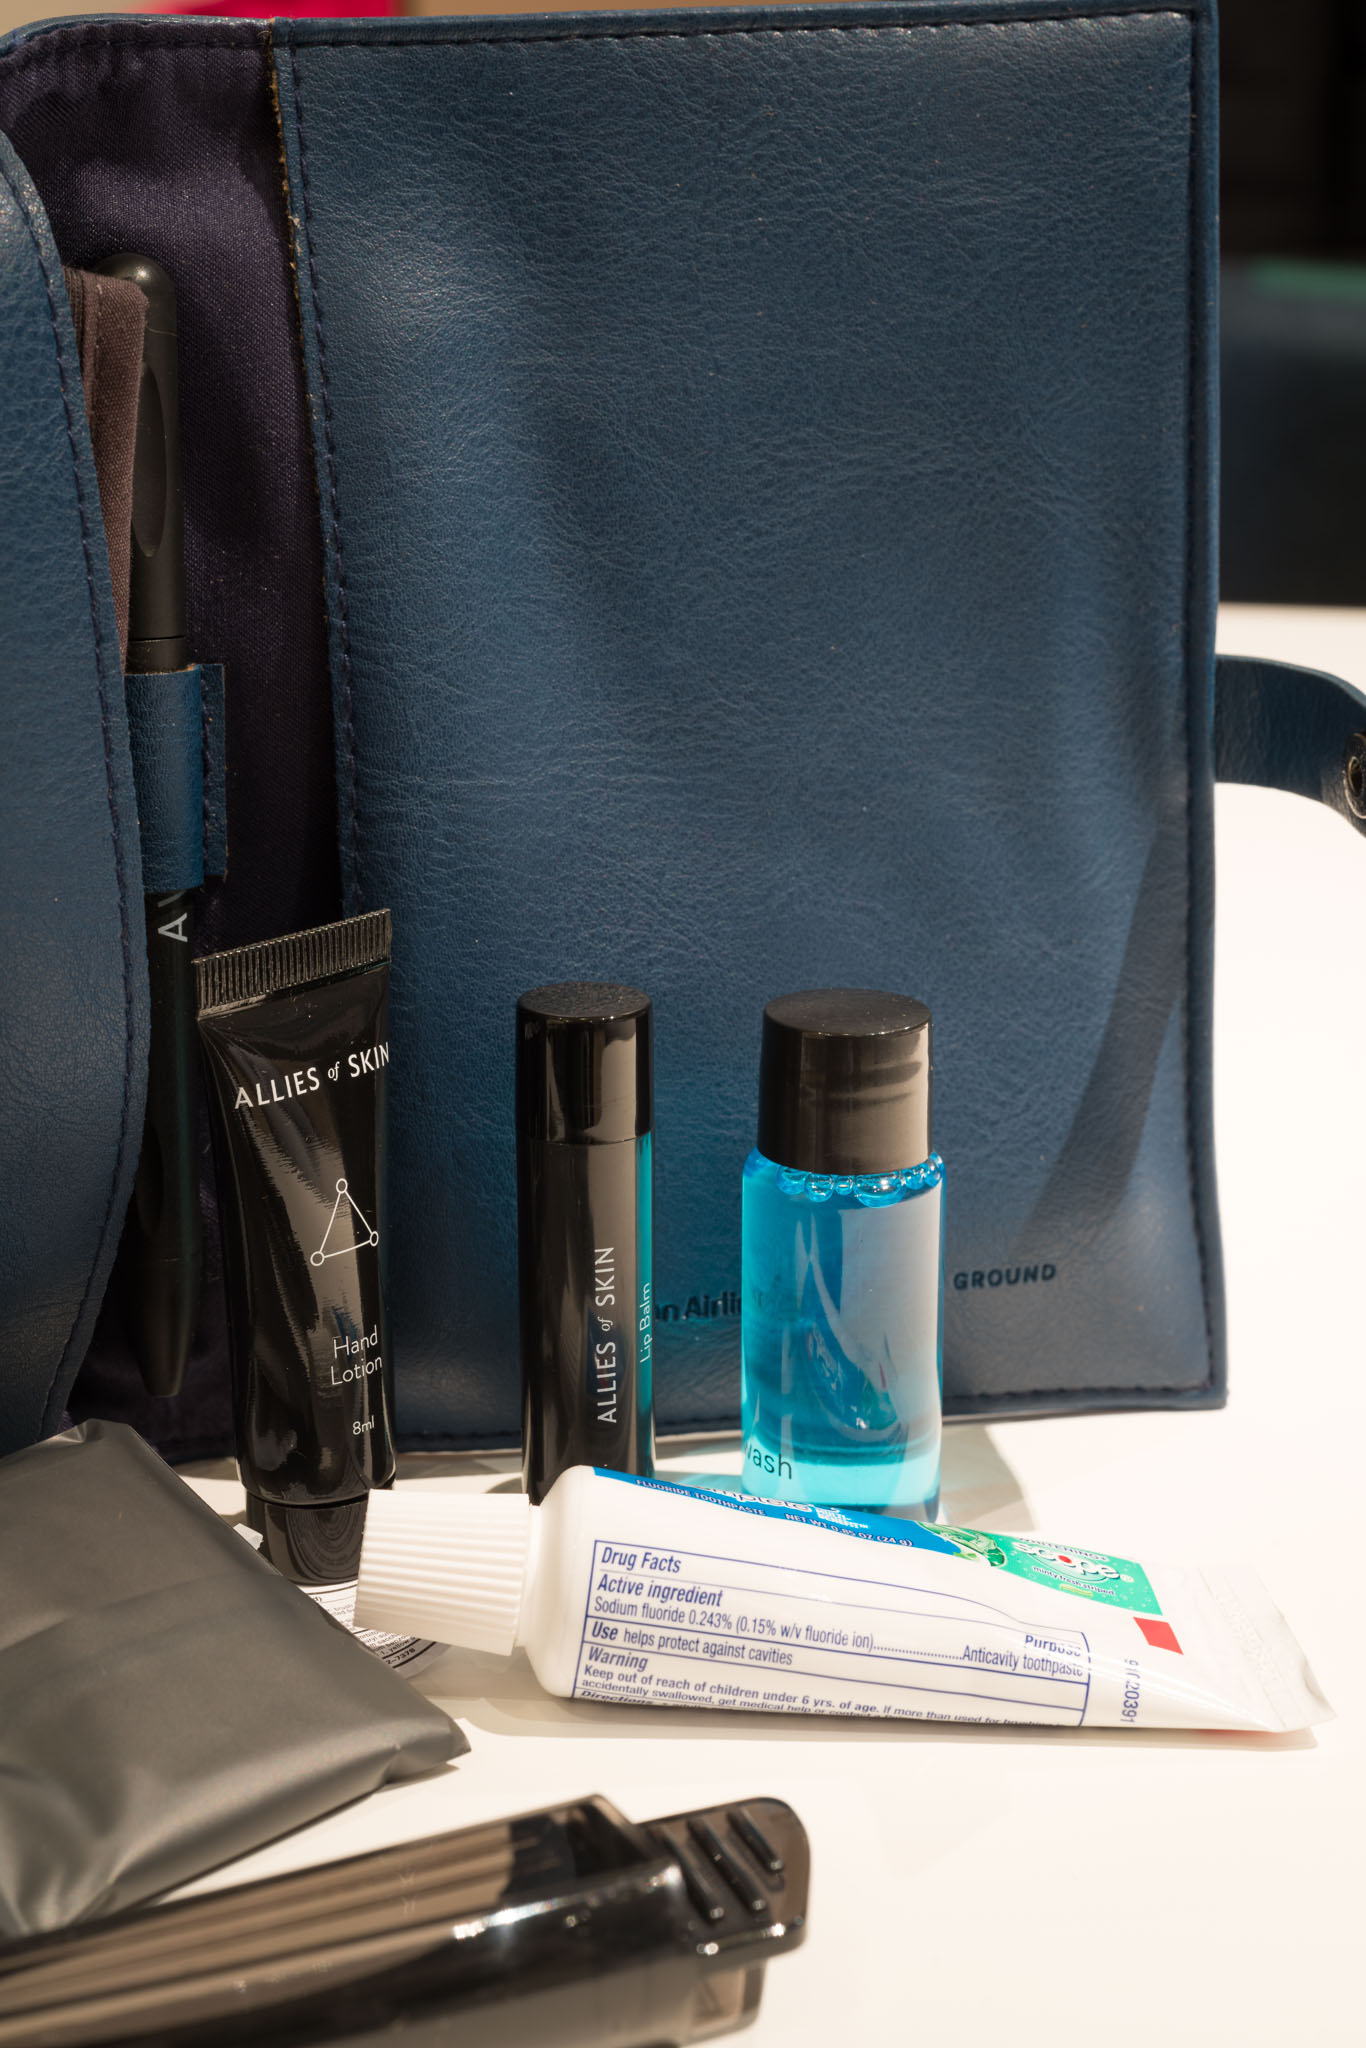 a bag with a few small bottles of toiletries